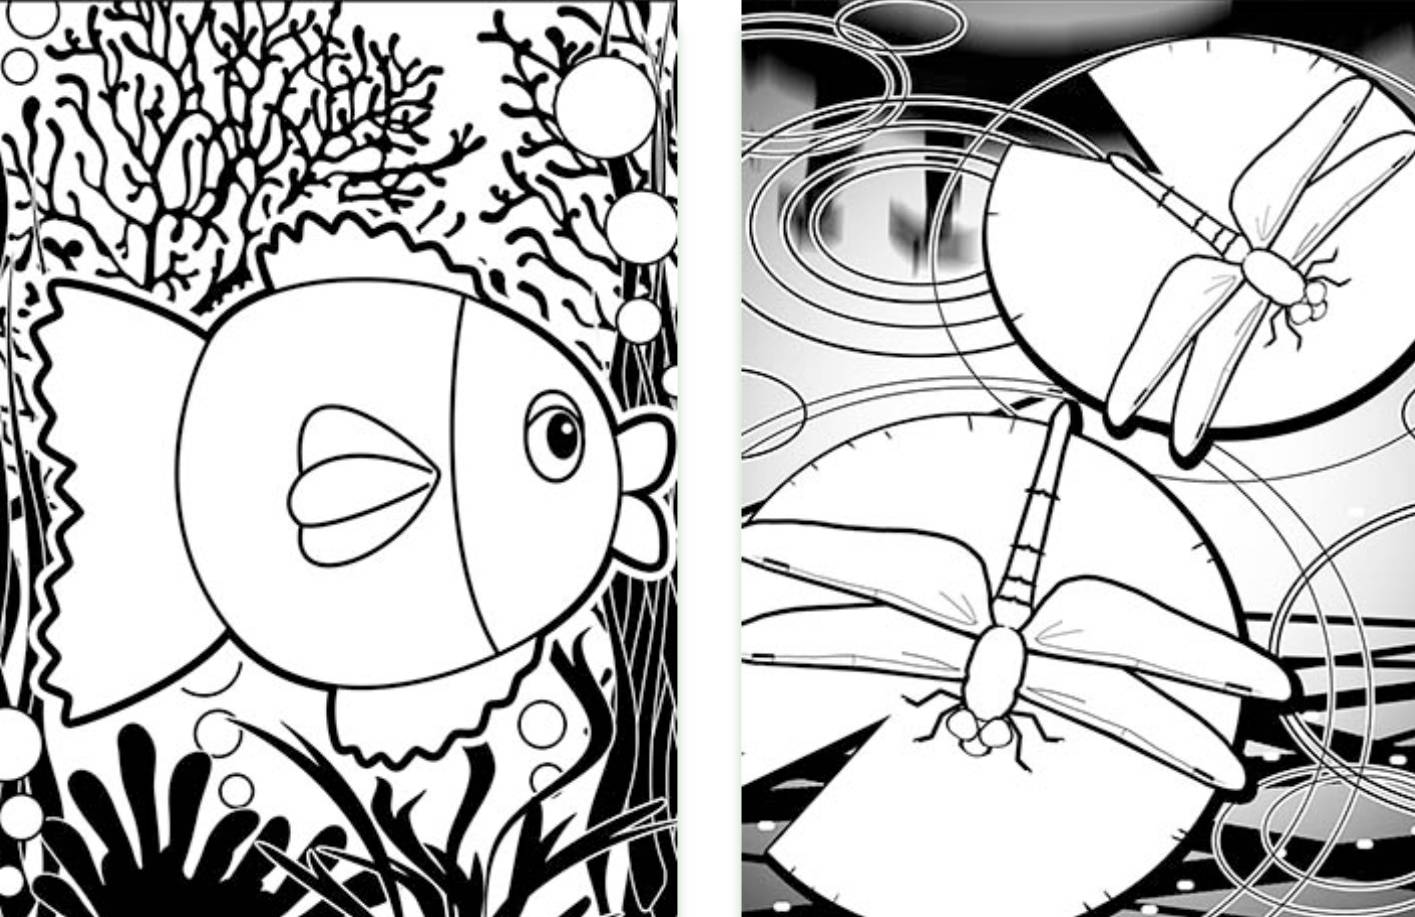 Two coloring pages. One has a fish and the other has two dragonflies on lily pads